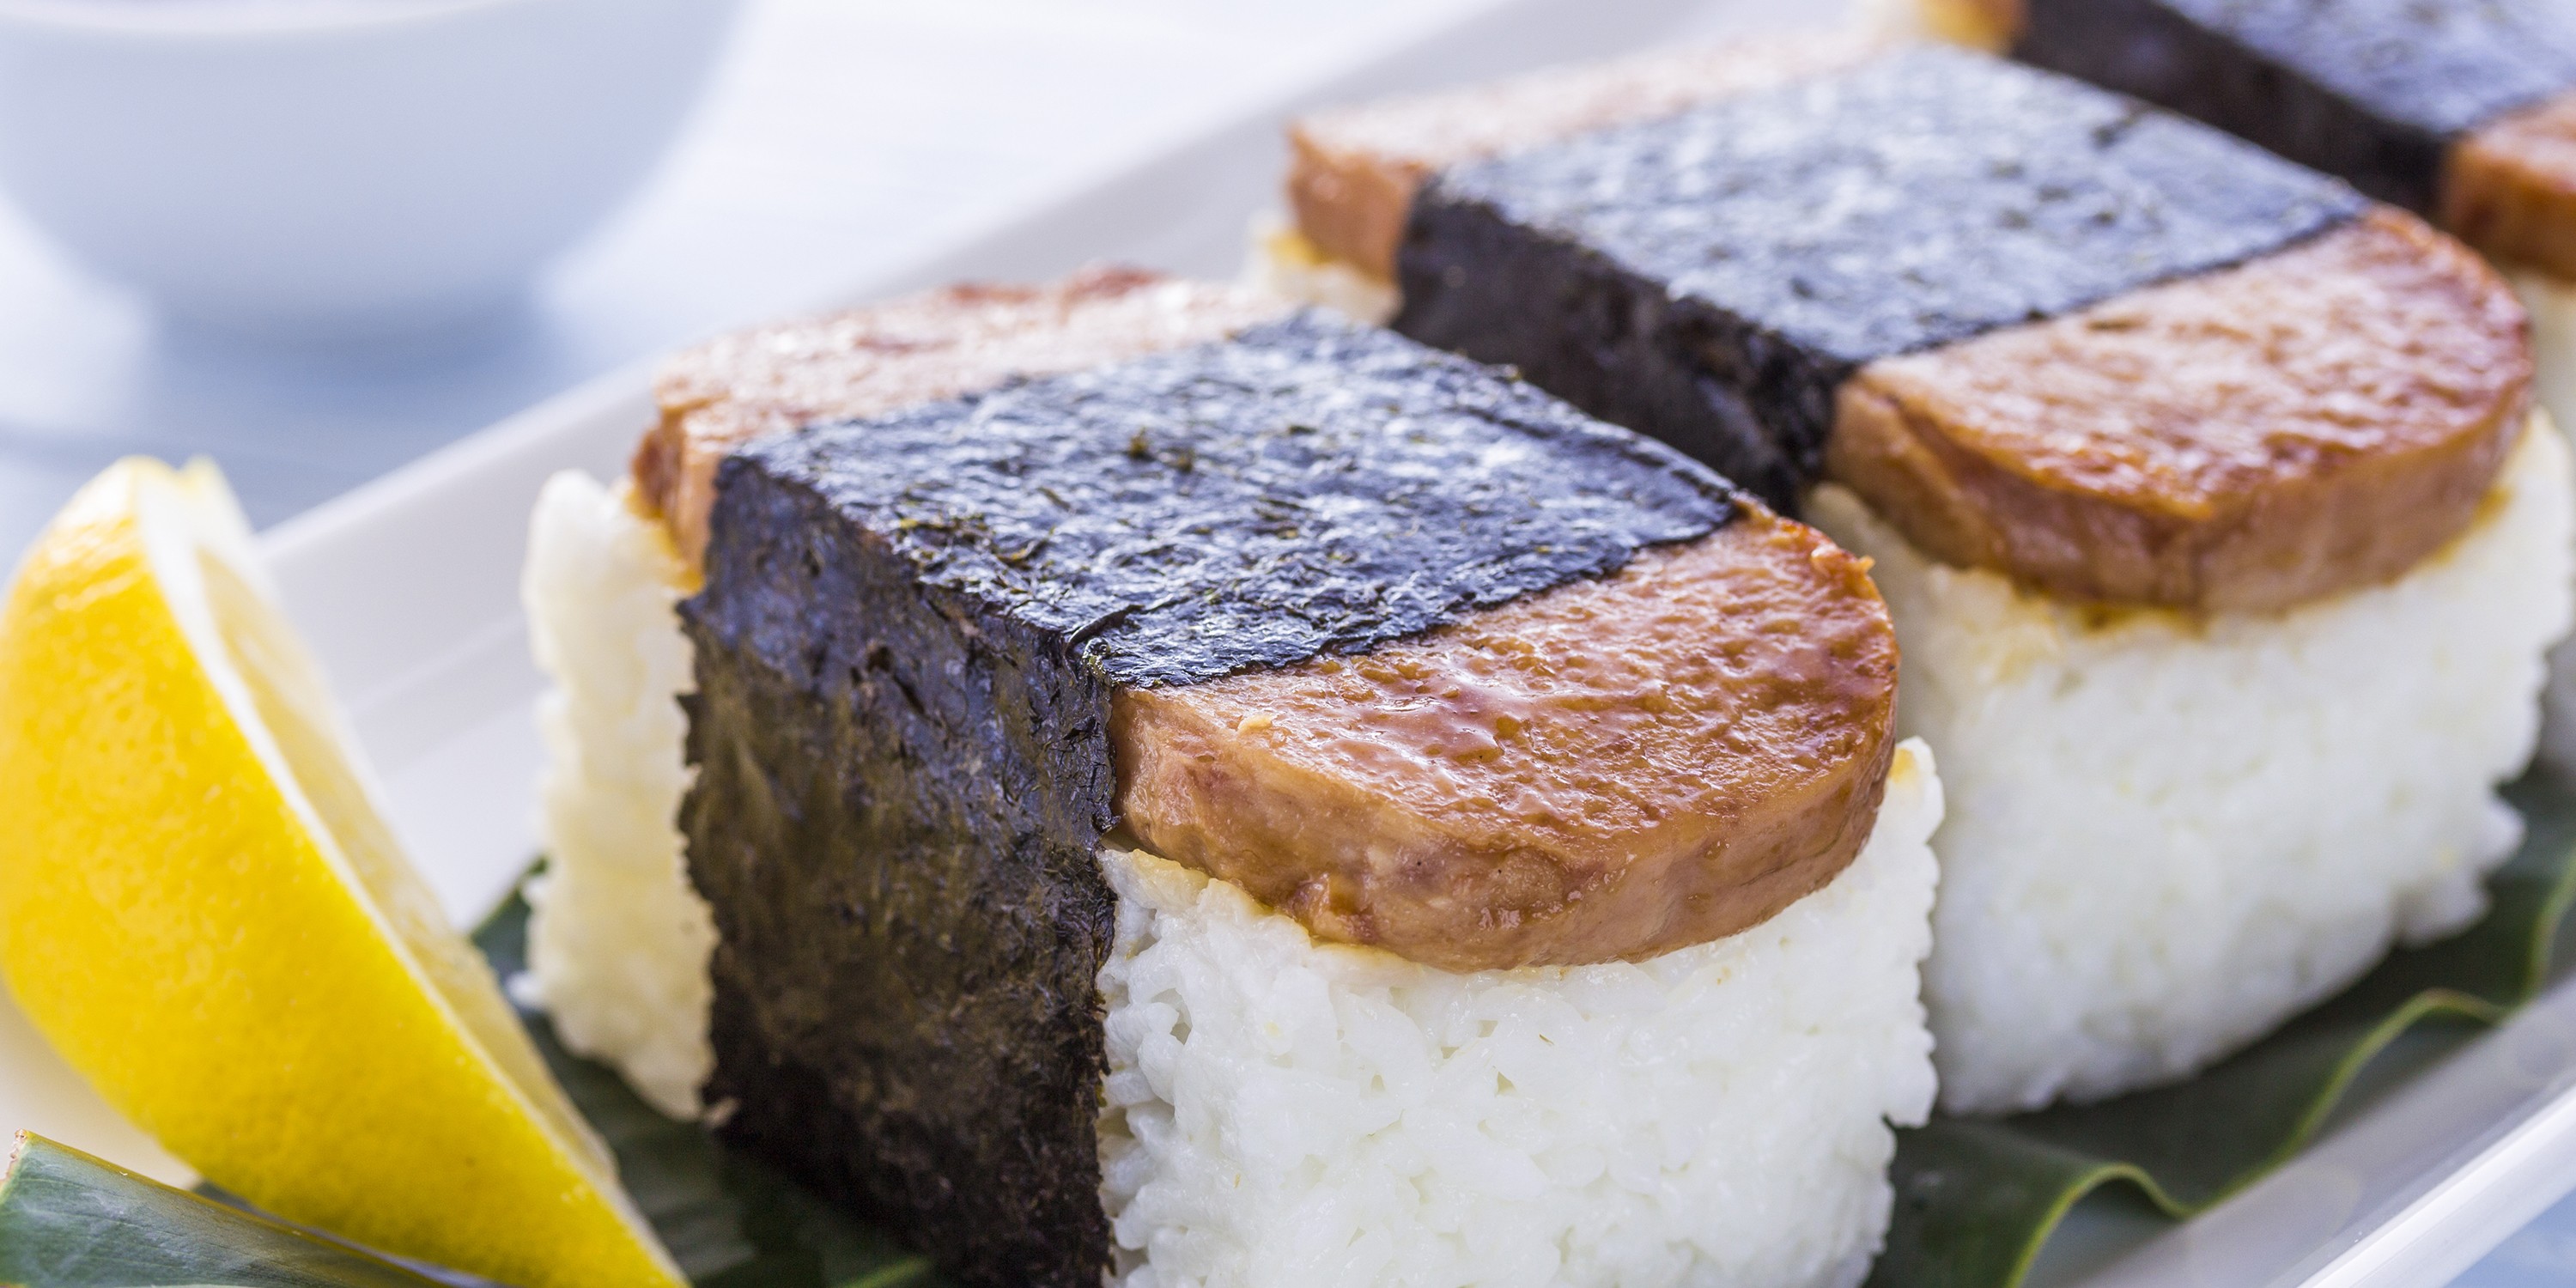 Hawaii love for Spam and recipes - This Hawaii Life